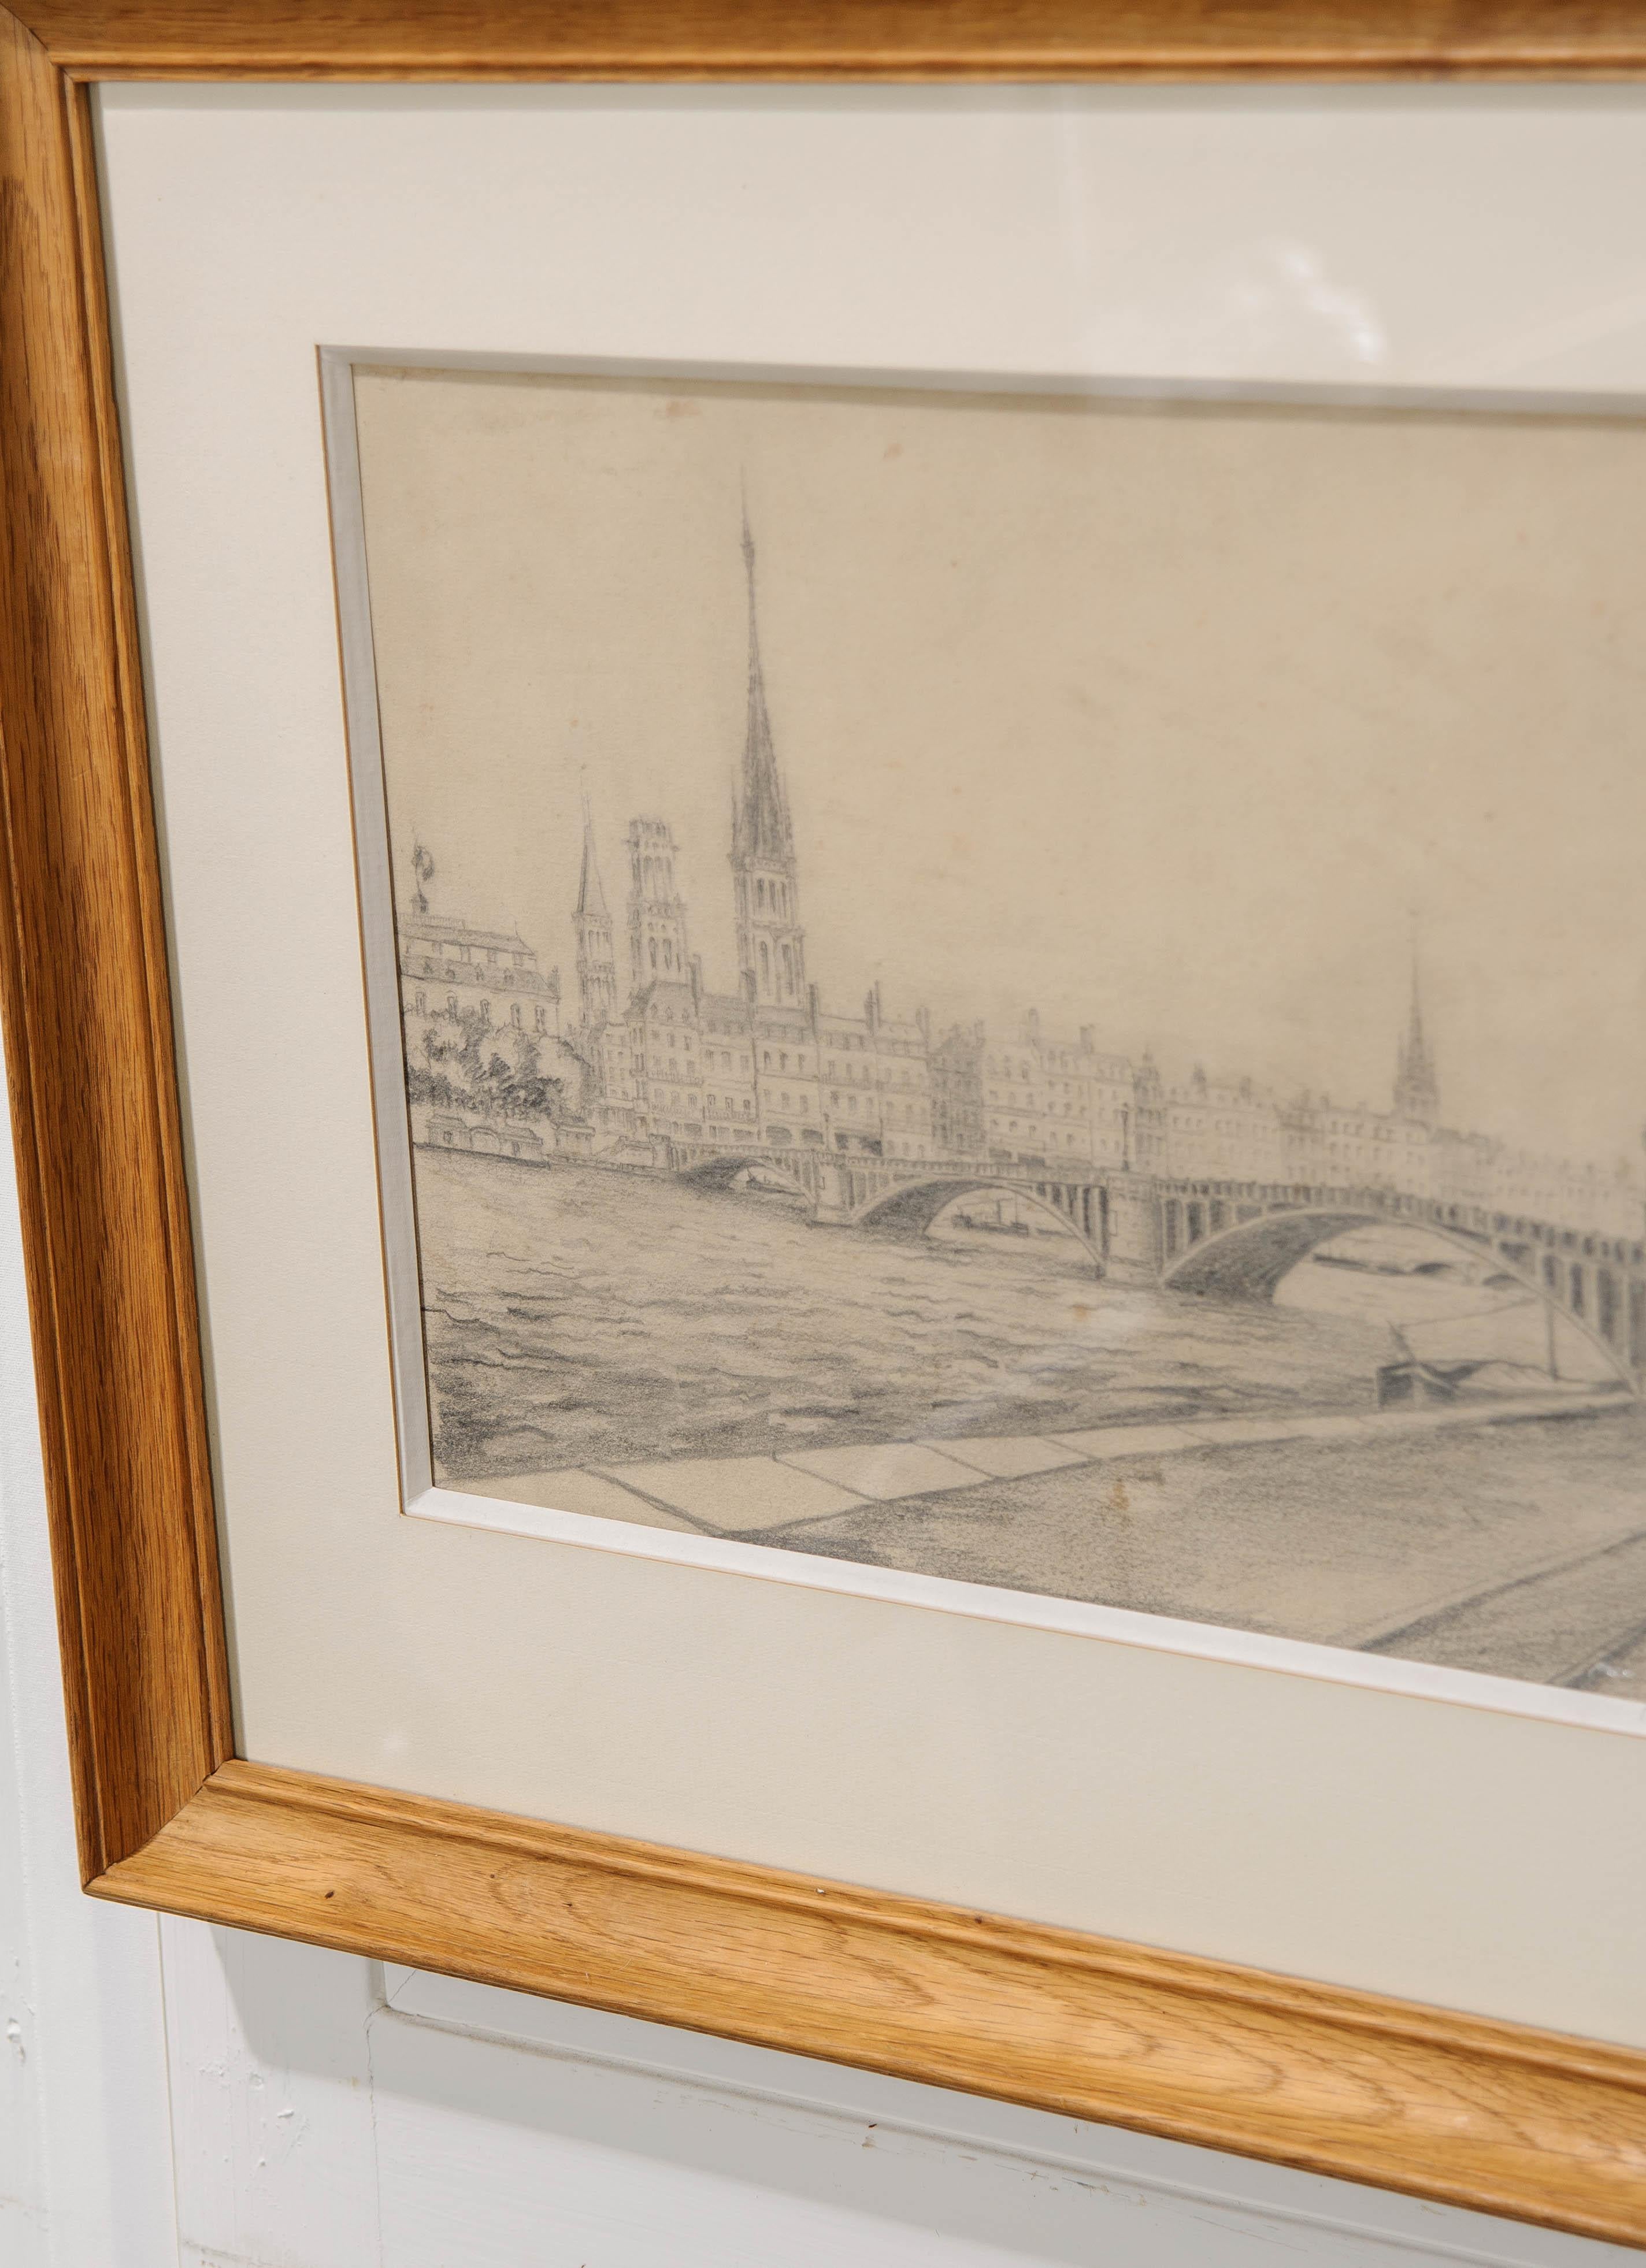 A lovely pencil sketch of a bridge over the Seine near the Palais de Justice. The work has been recently re-framed in its original frame. The frame is a simple moulded bleached wood that complements the artwork wonderfully.